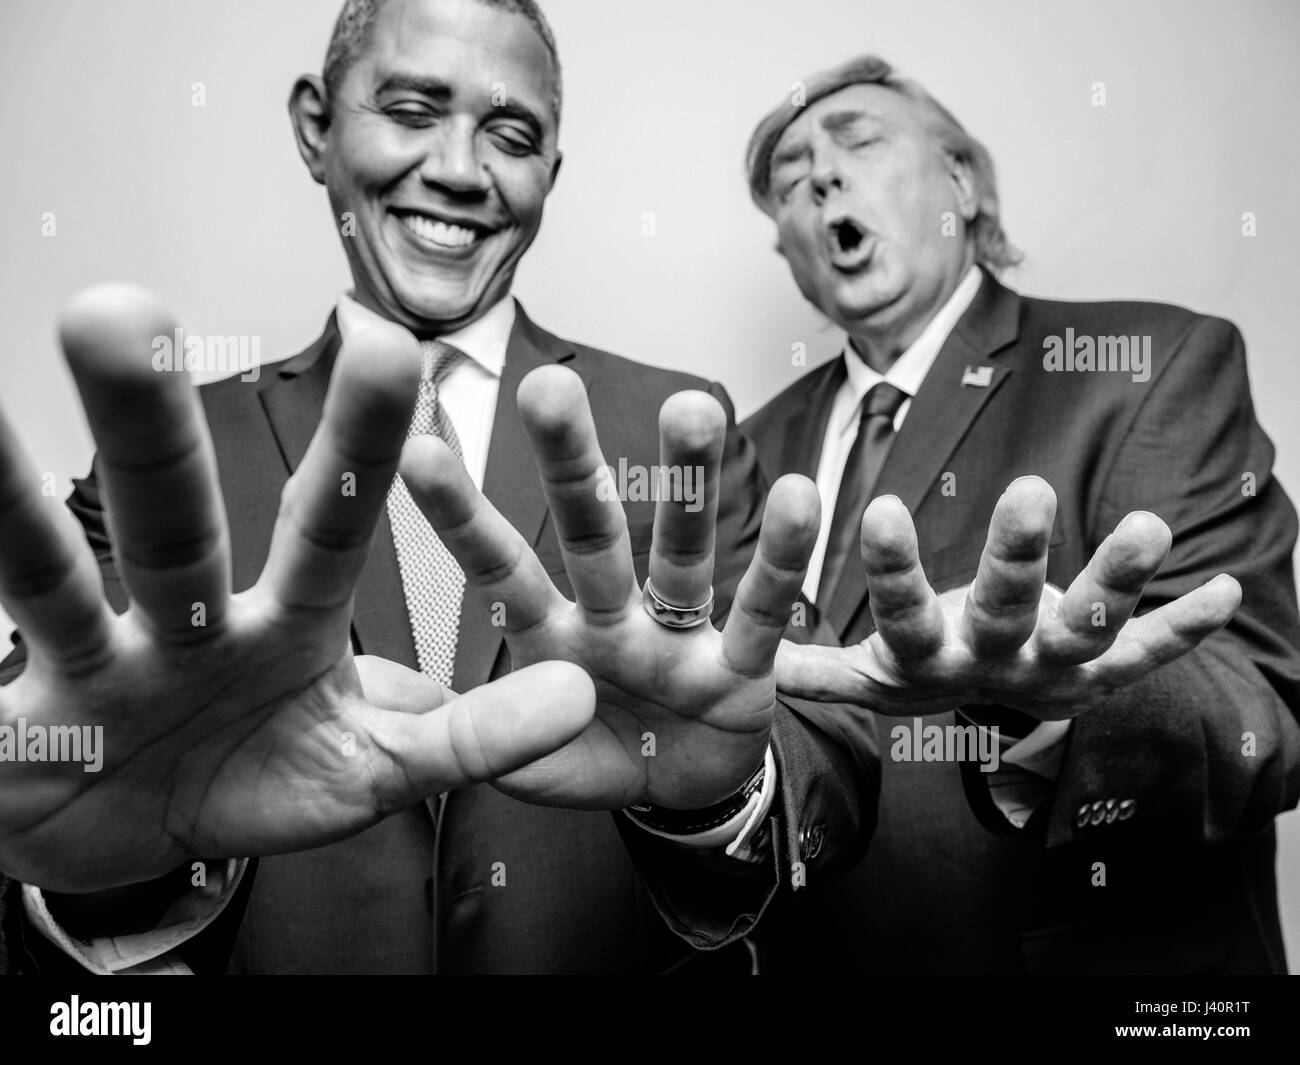 President Barack Obama and President Donald J Trump lookalikes compare hand sizes to see who has the biggest hands during a photoshoot in Hong Kong. Stock Photo